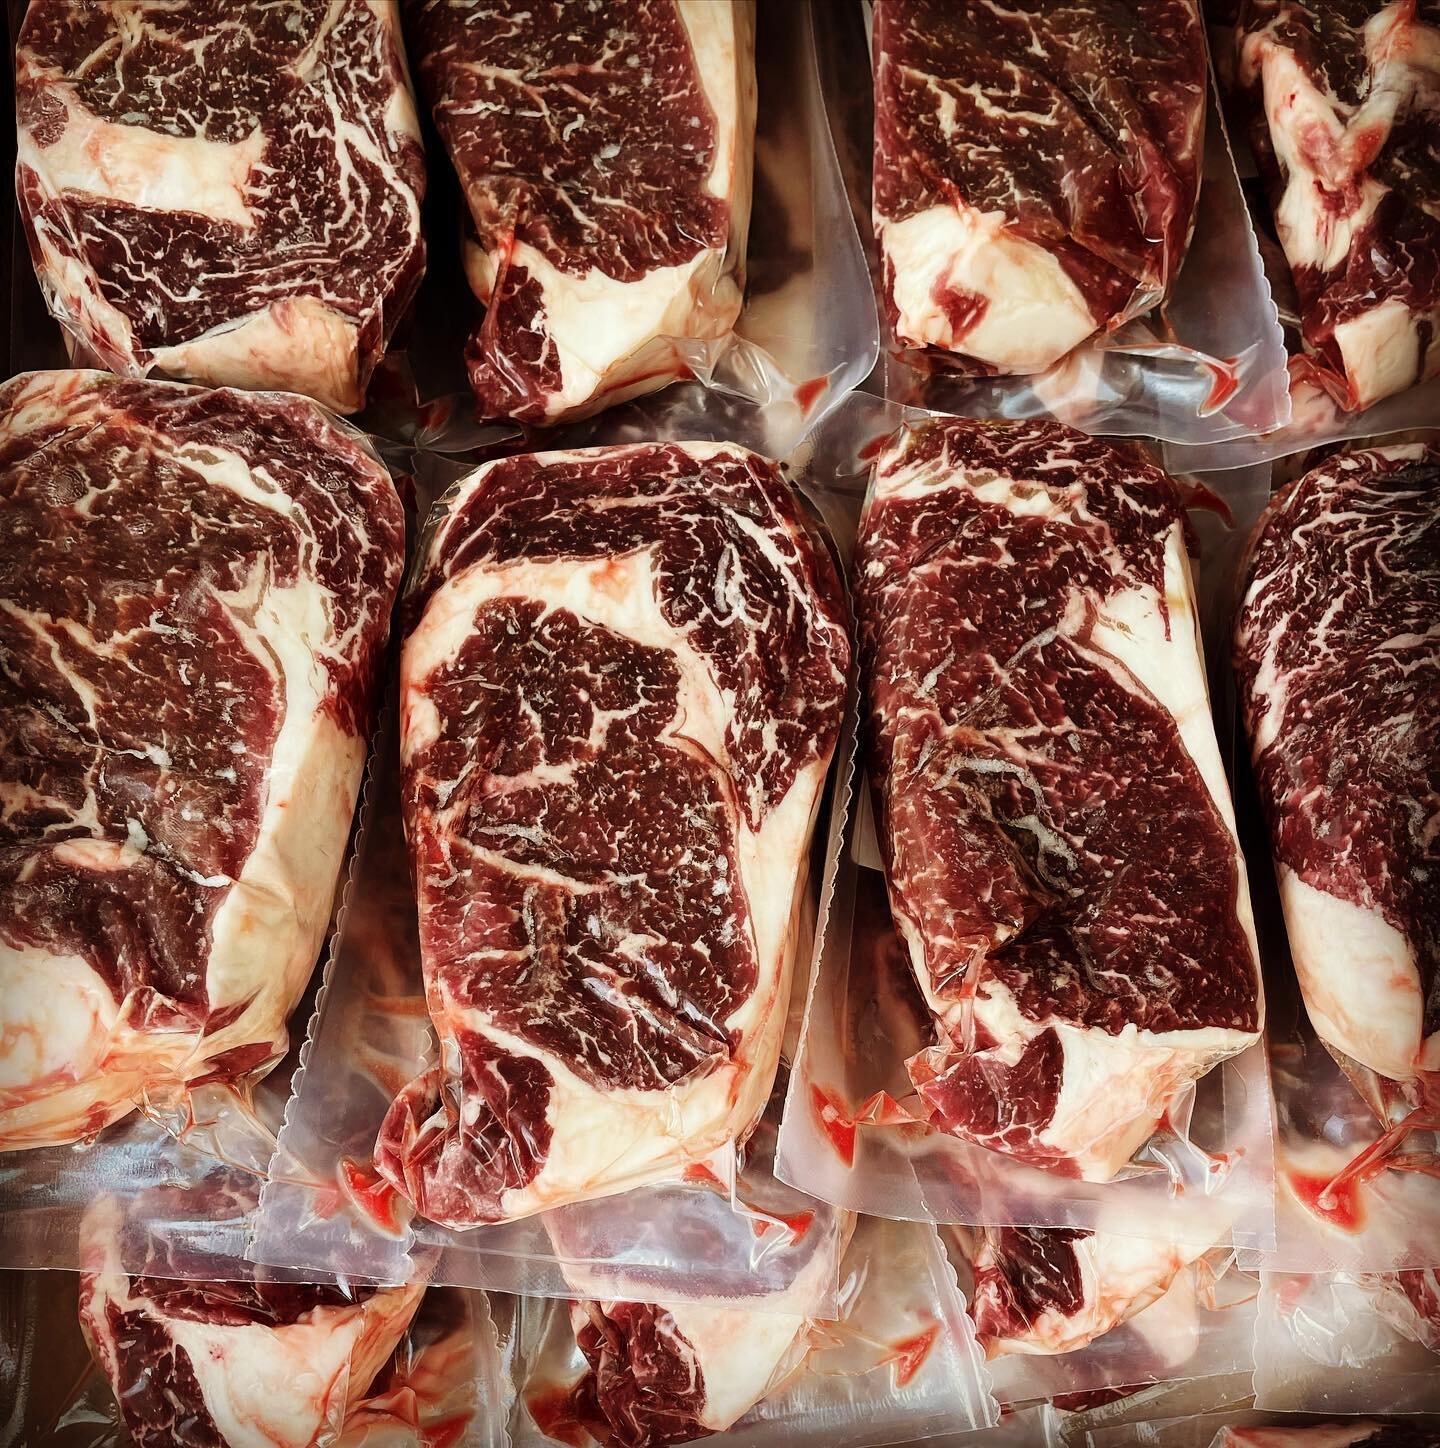 We just RESTOCKED on Delmonico, New York Strip and Tenderloin steaks🥩 

Come get &lsquo;em while we got &lsquo;em🤤
We are OPEN today until 4:00 PM👋🏼

📍2084 72nd Ave. Zeeland, Michigan